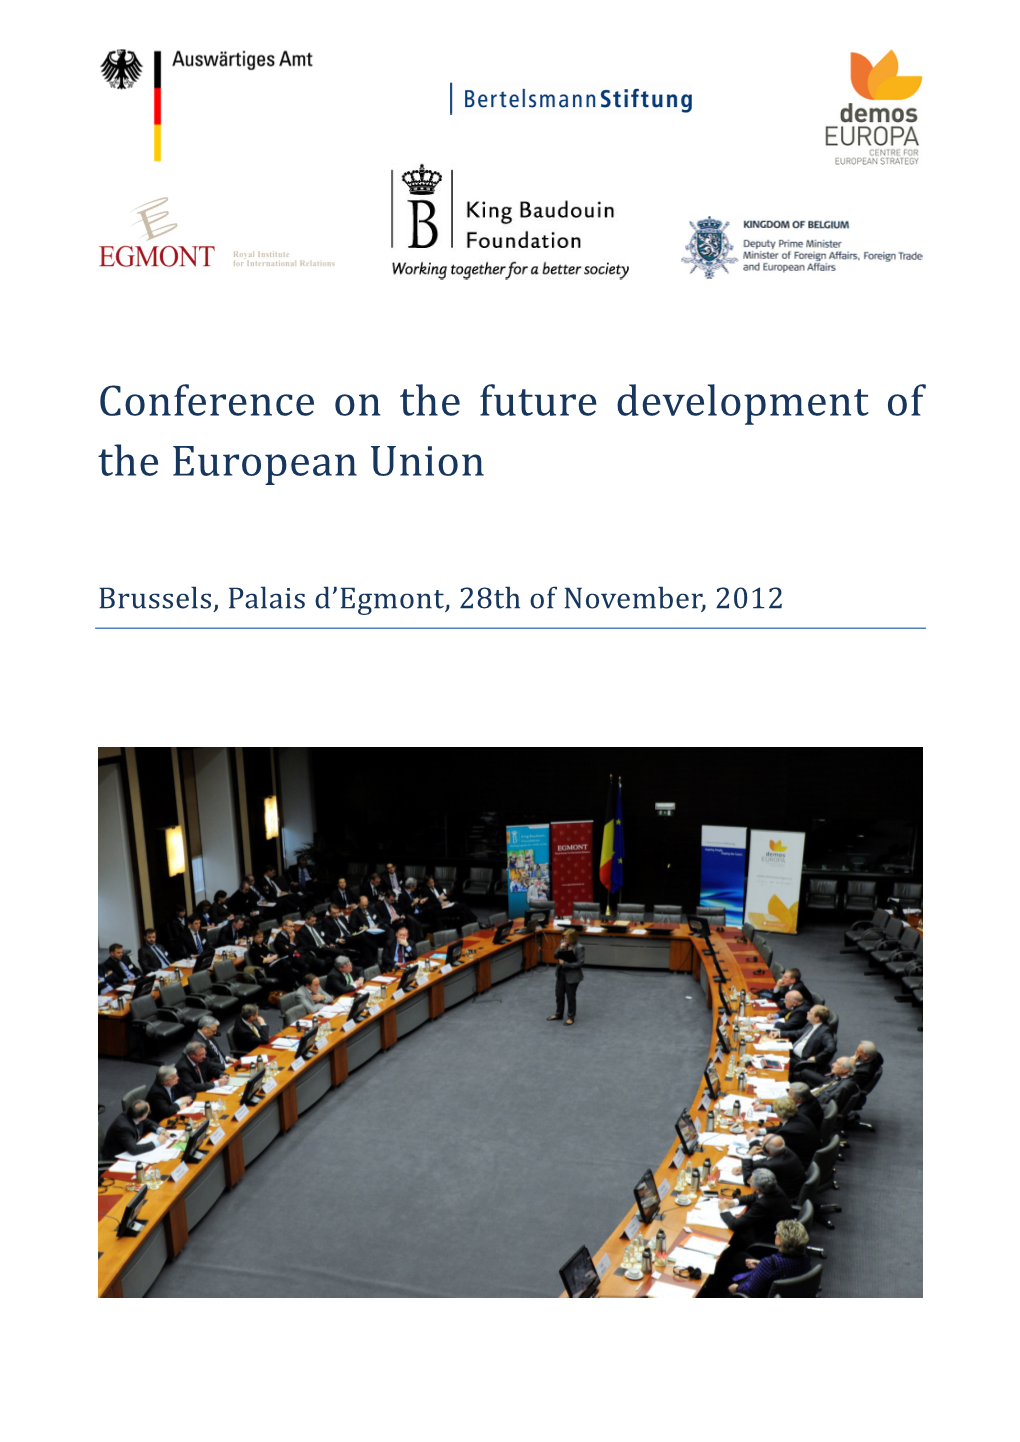 Conference on the Future Development of the European Union